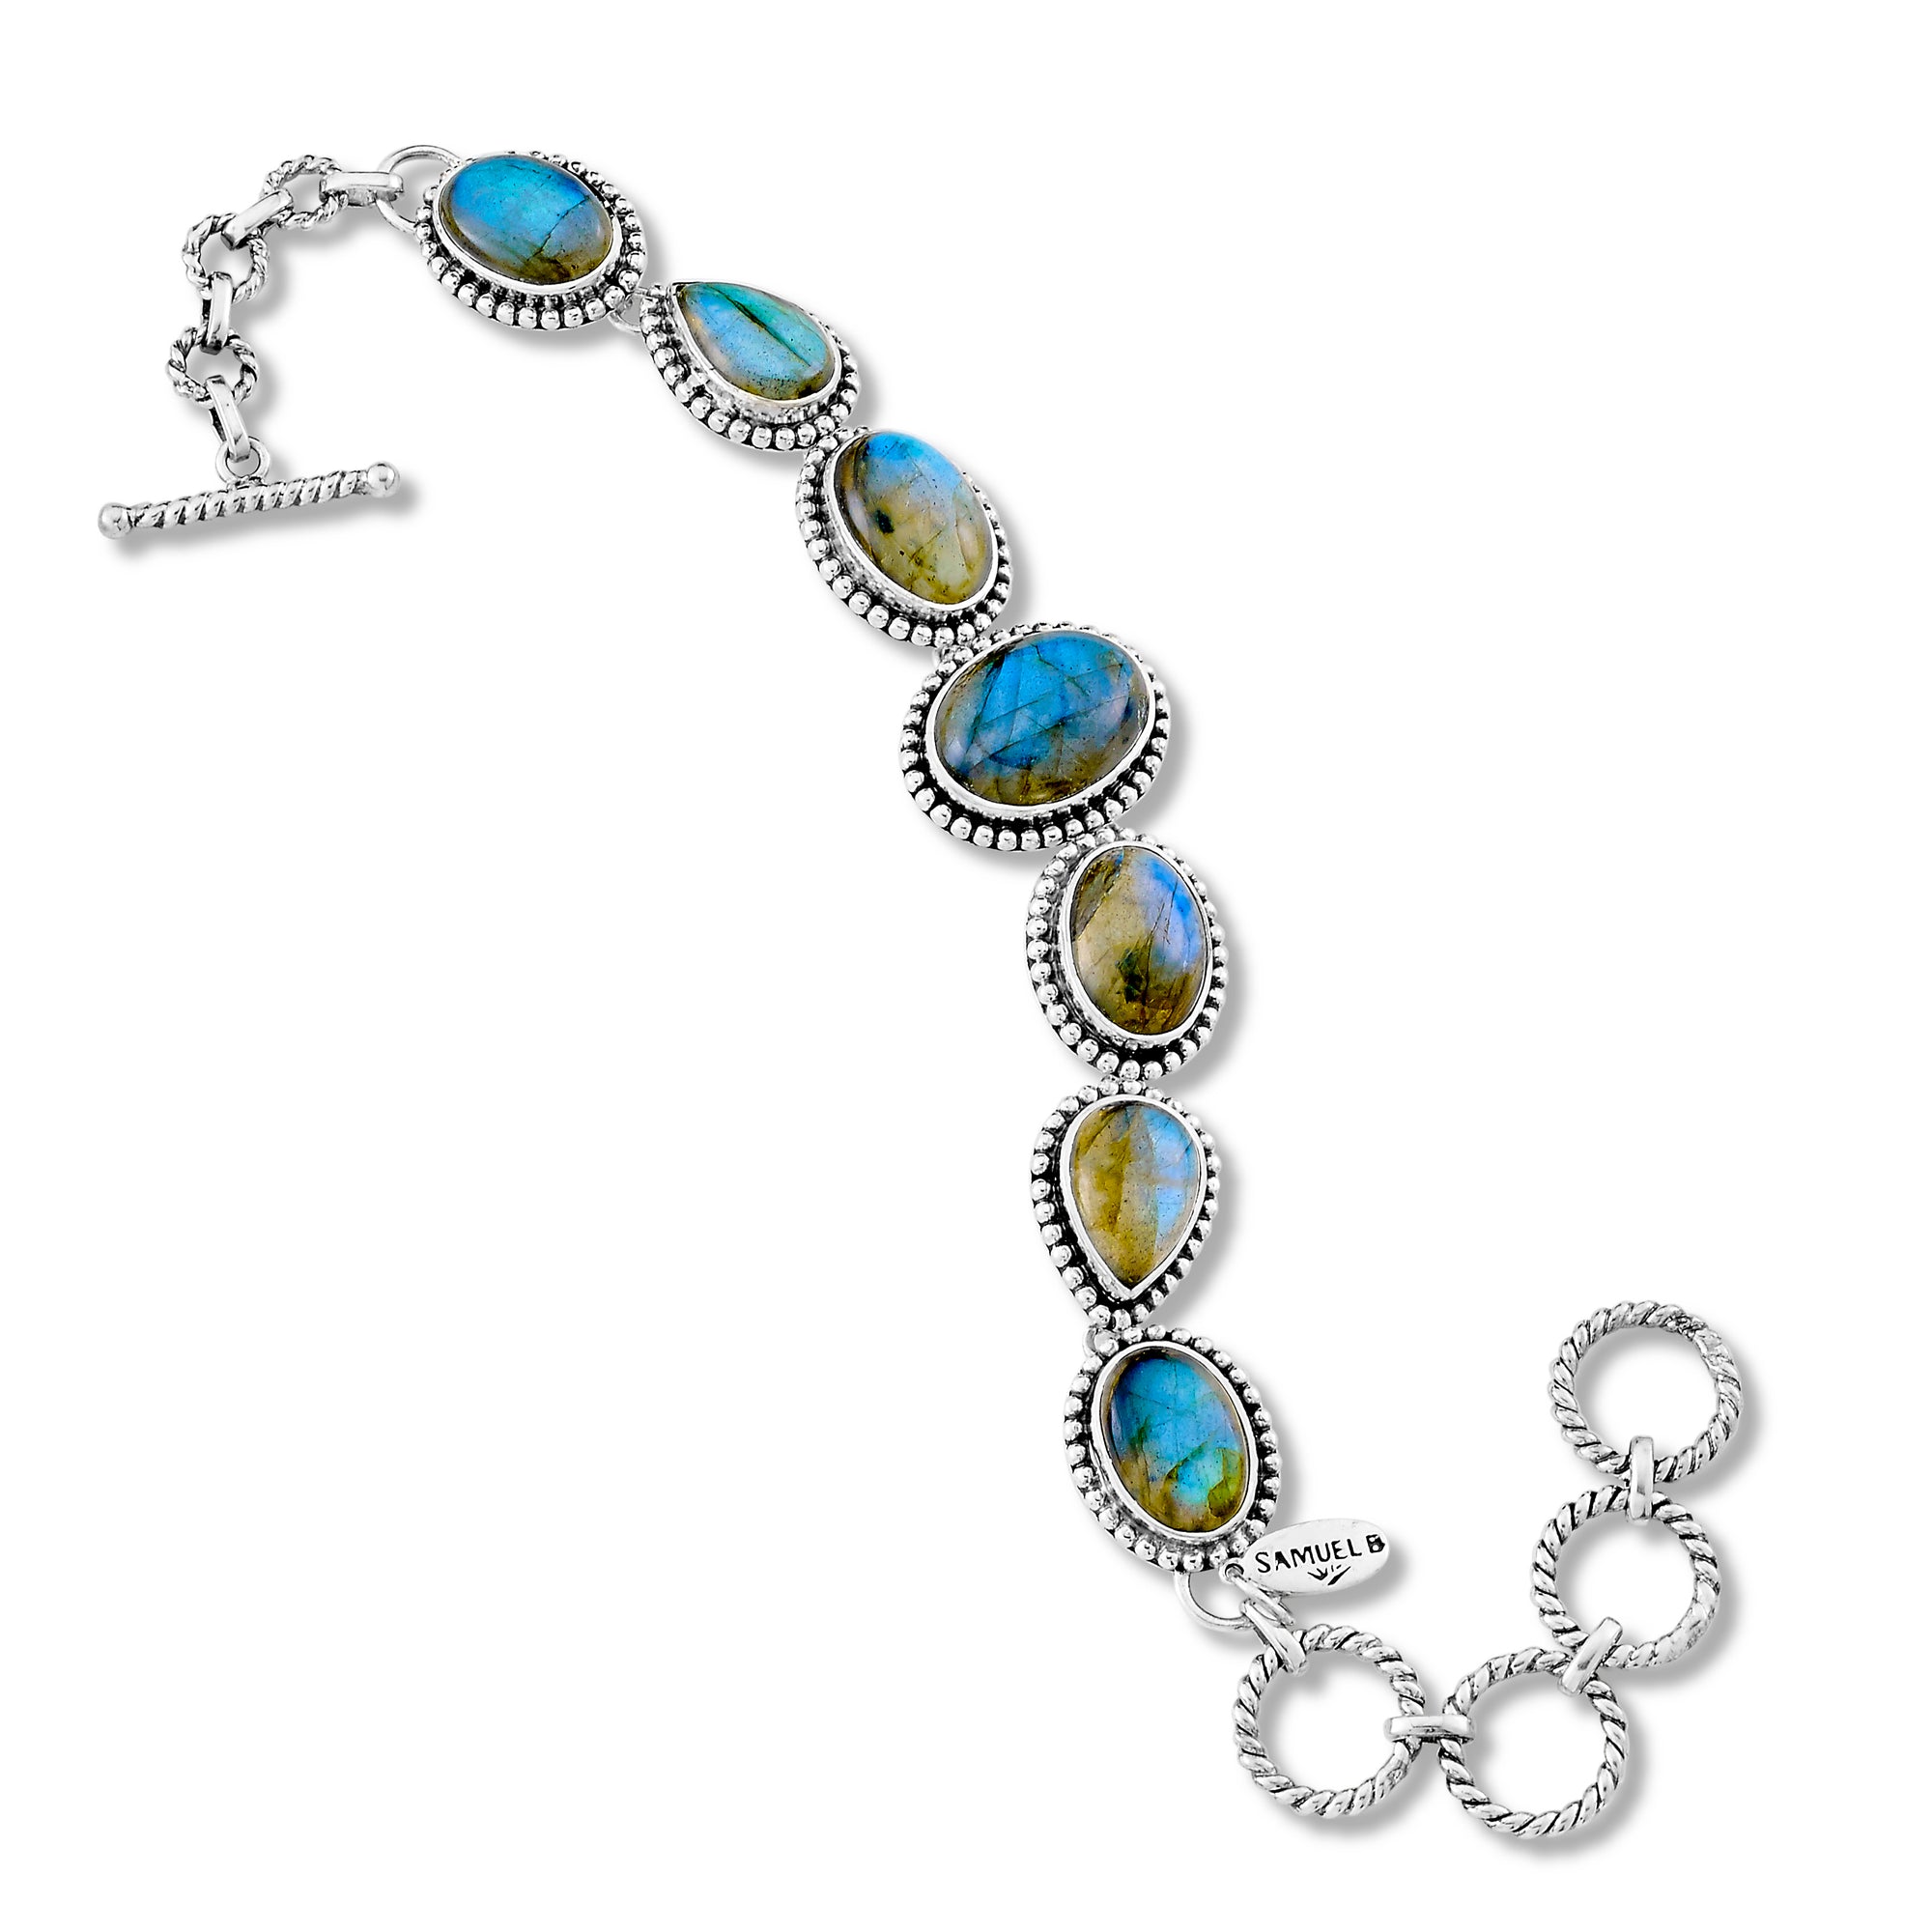 Labradorite Tampomas Bracelet available at Talisman Collection Fine Jewelers in El Dorado Hills, CA and online. Specs: Labradorite Tampomas Bracelet features 7 iridescent labradorite stones set in sterling silver. 